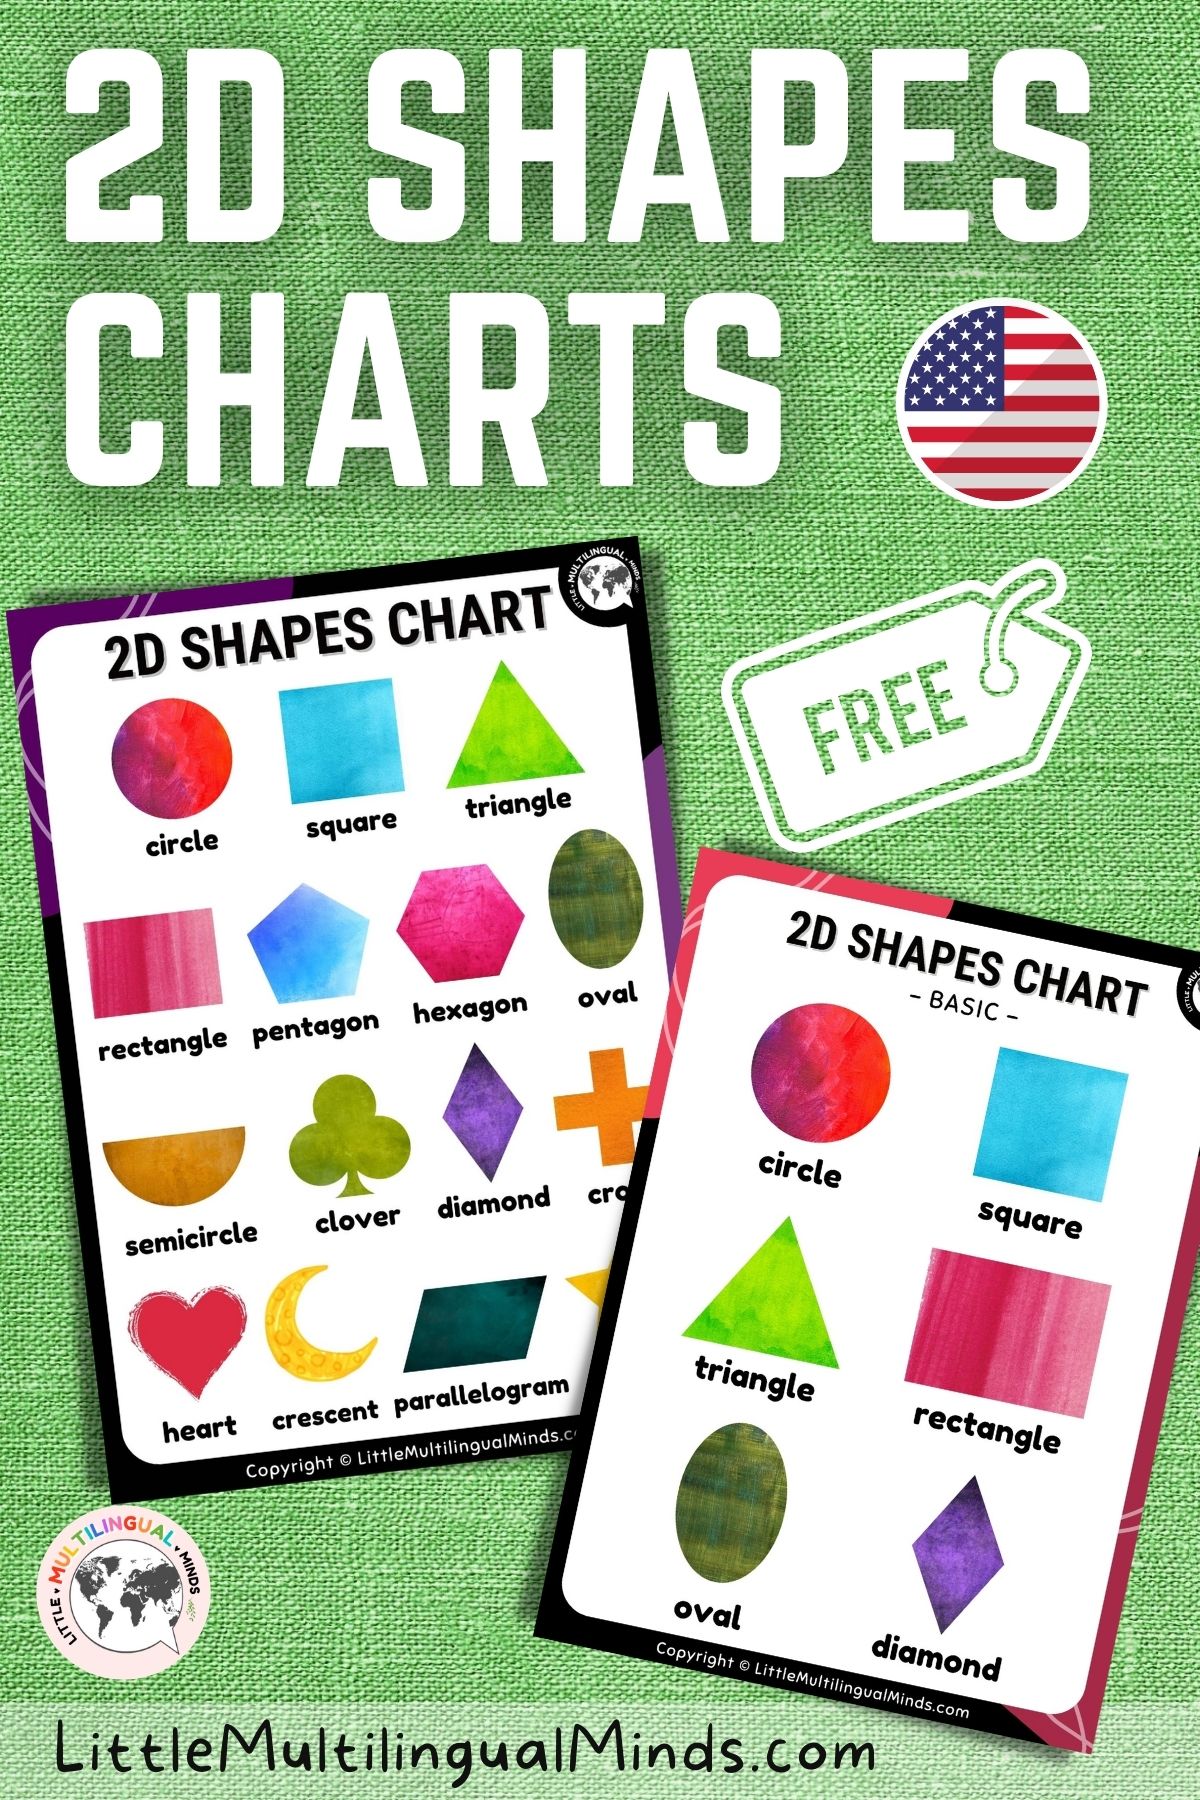 2D shapes charts for toddlers and preschoolers